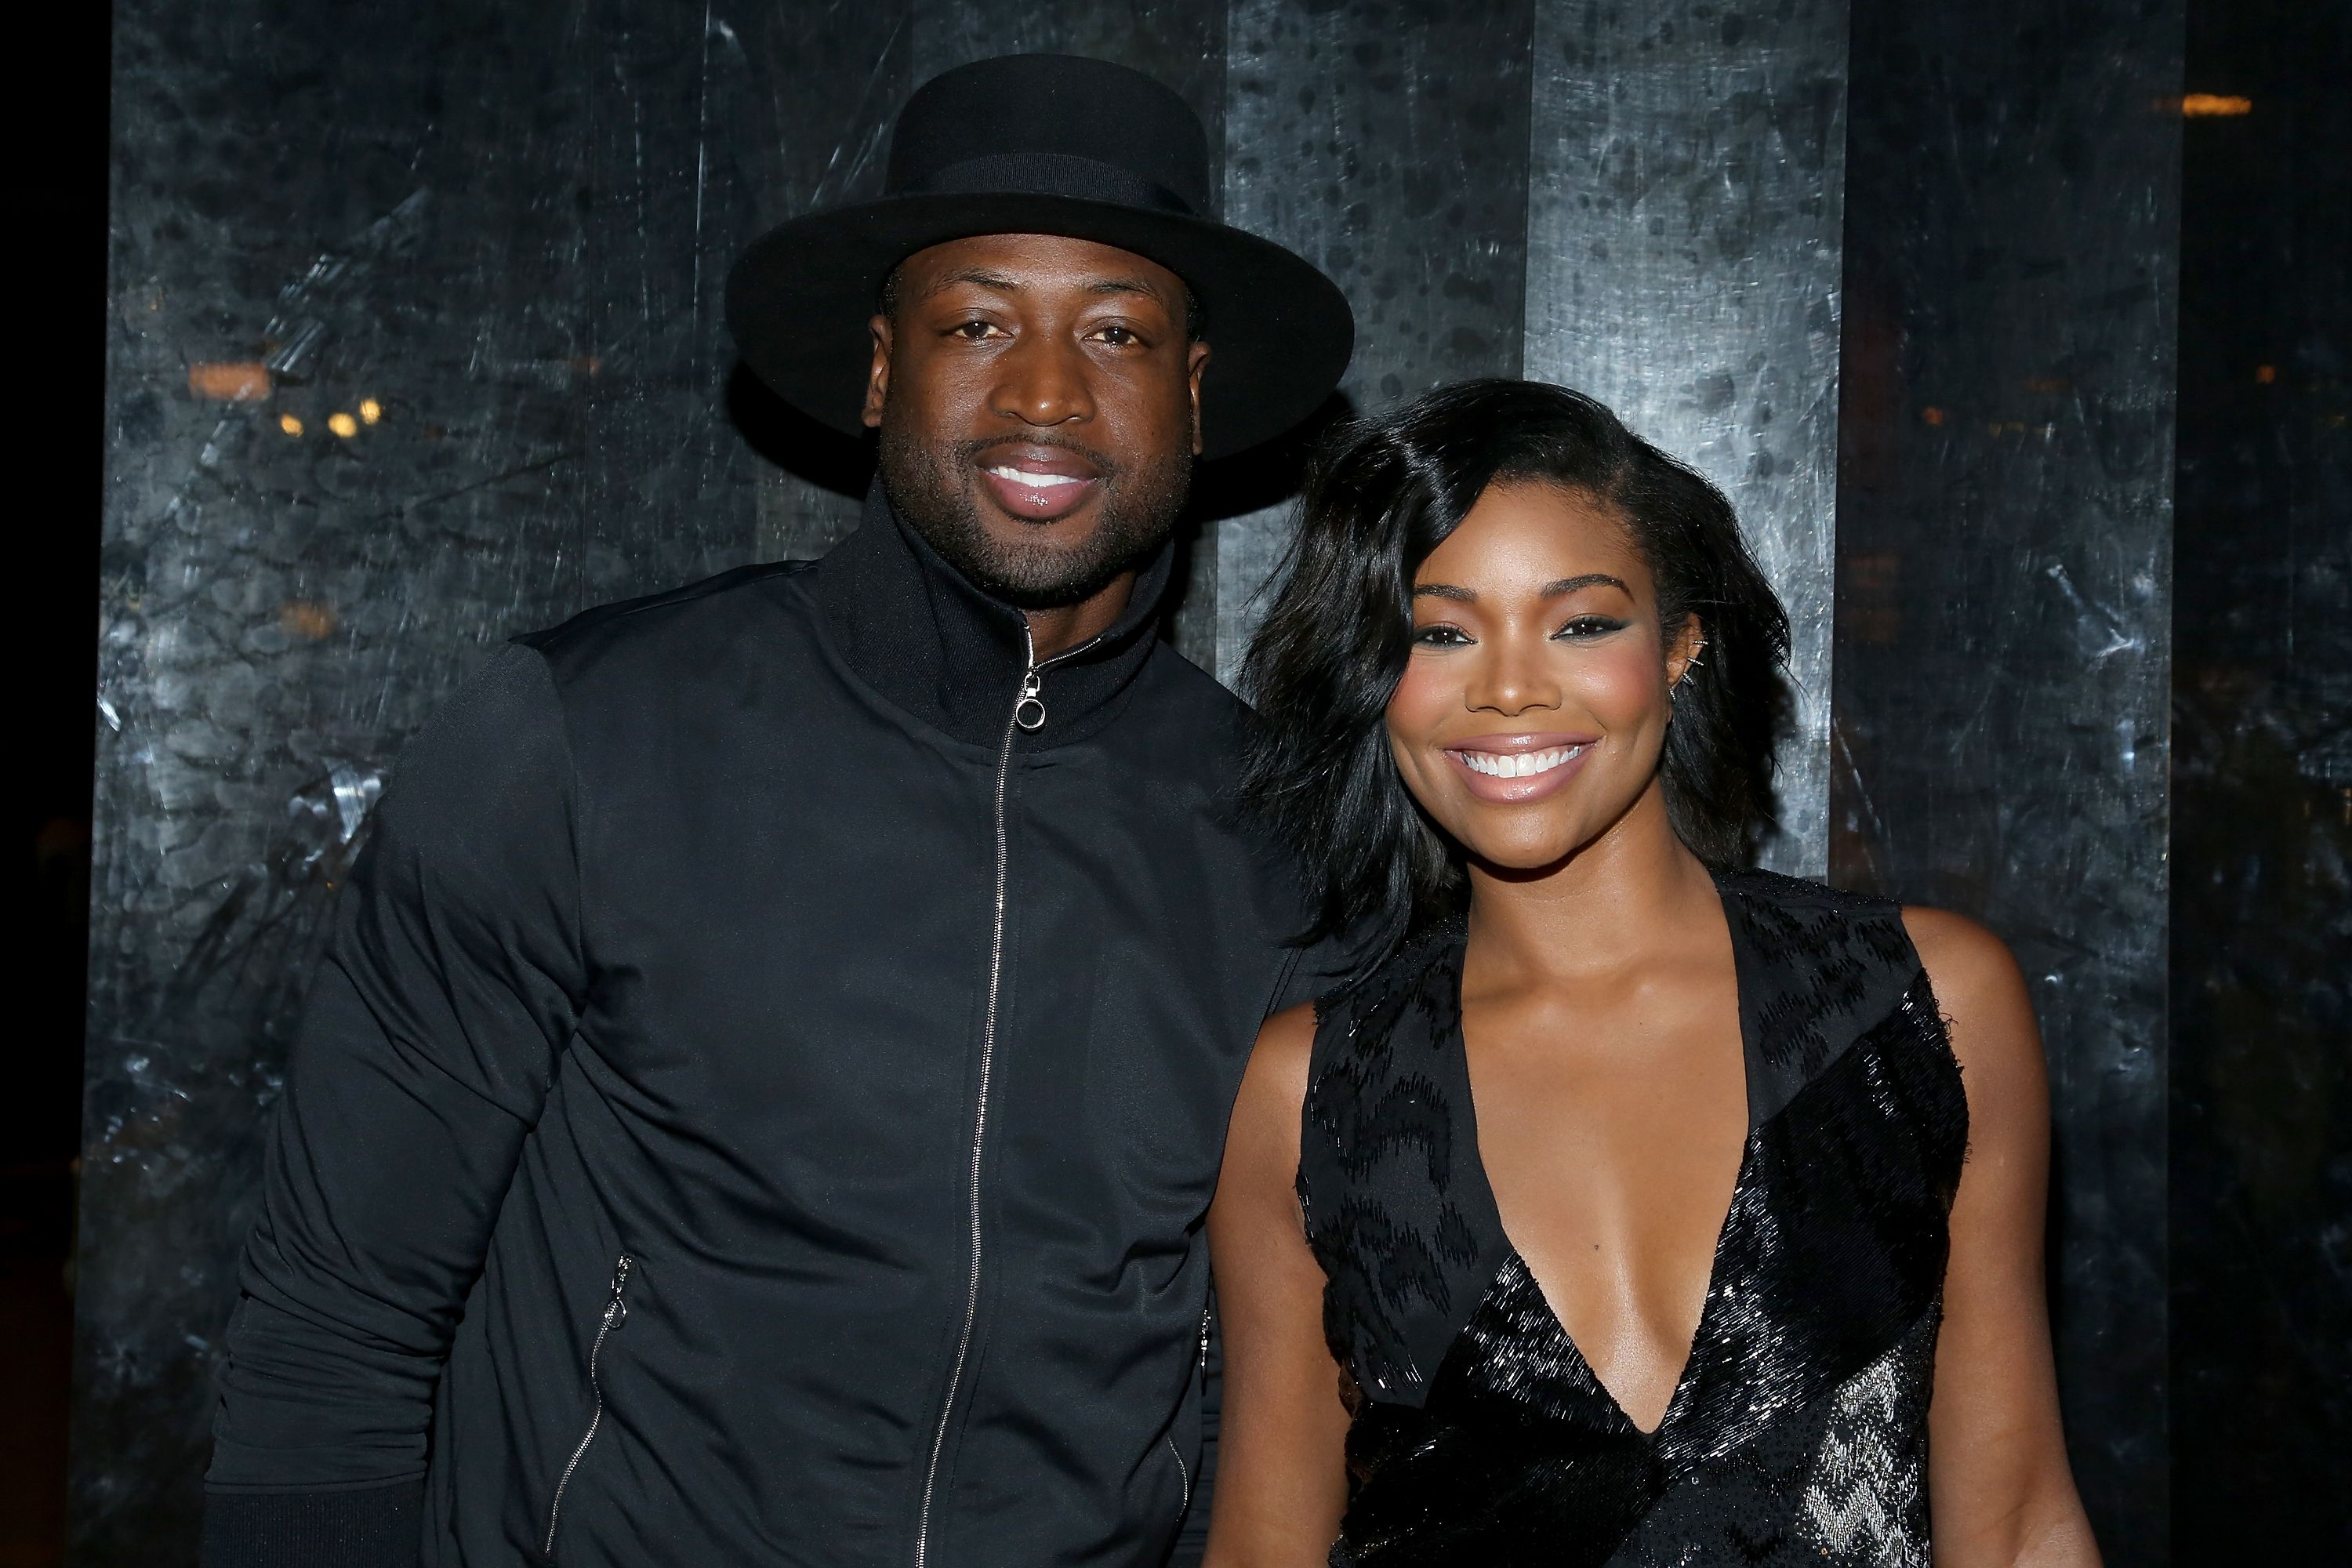 Gabrielle Union and Dwyane Wade at New York Fashion Week on September 13, 2015 in New York City. | Source: Getty Images